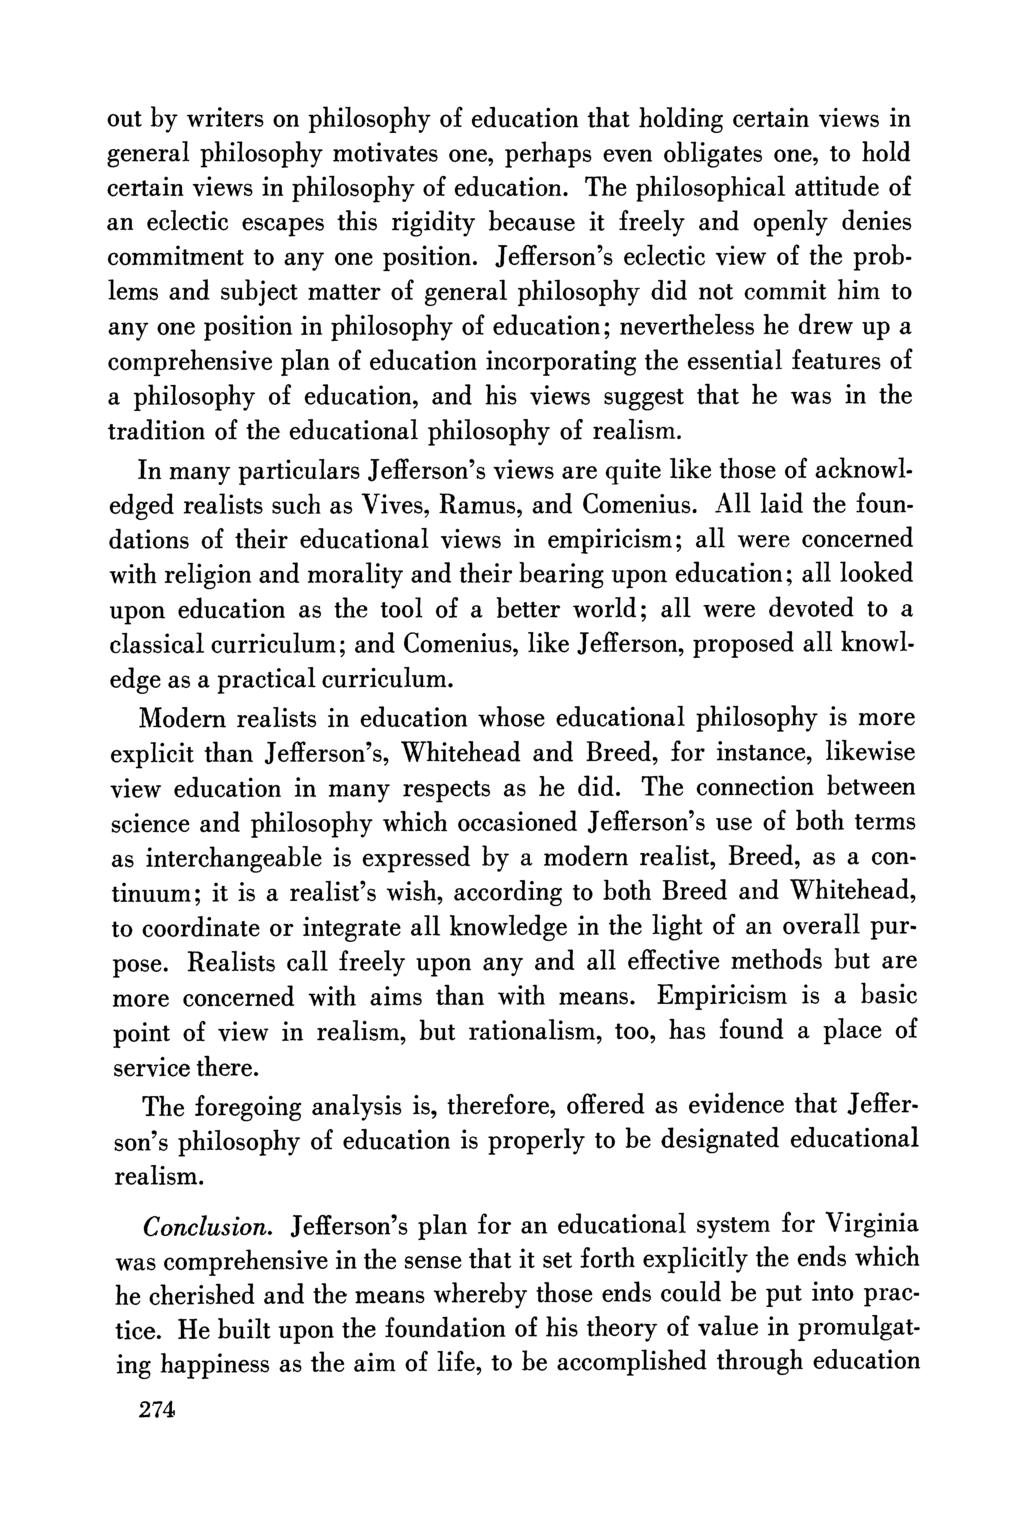 out by writers on philosophy of education that holding certain views in general philosophy motivates one, perhaps even obligates one, to hold certain views in philosophy of education.